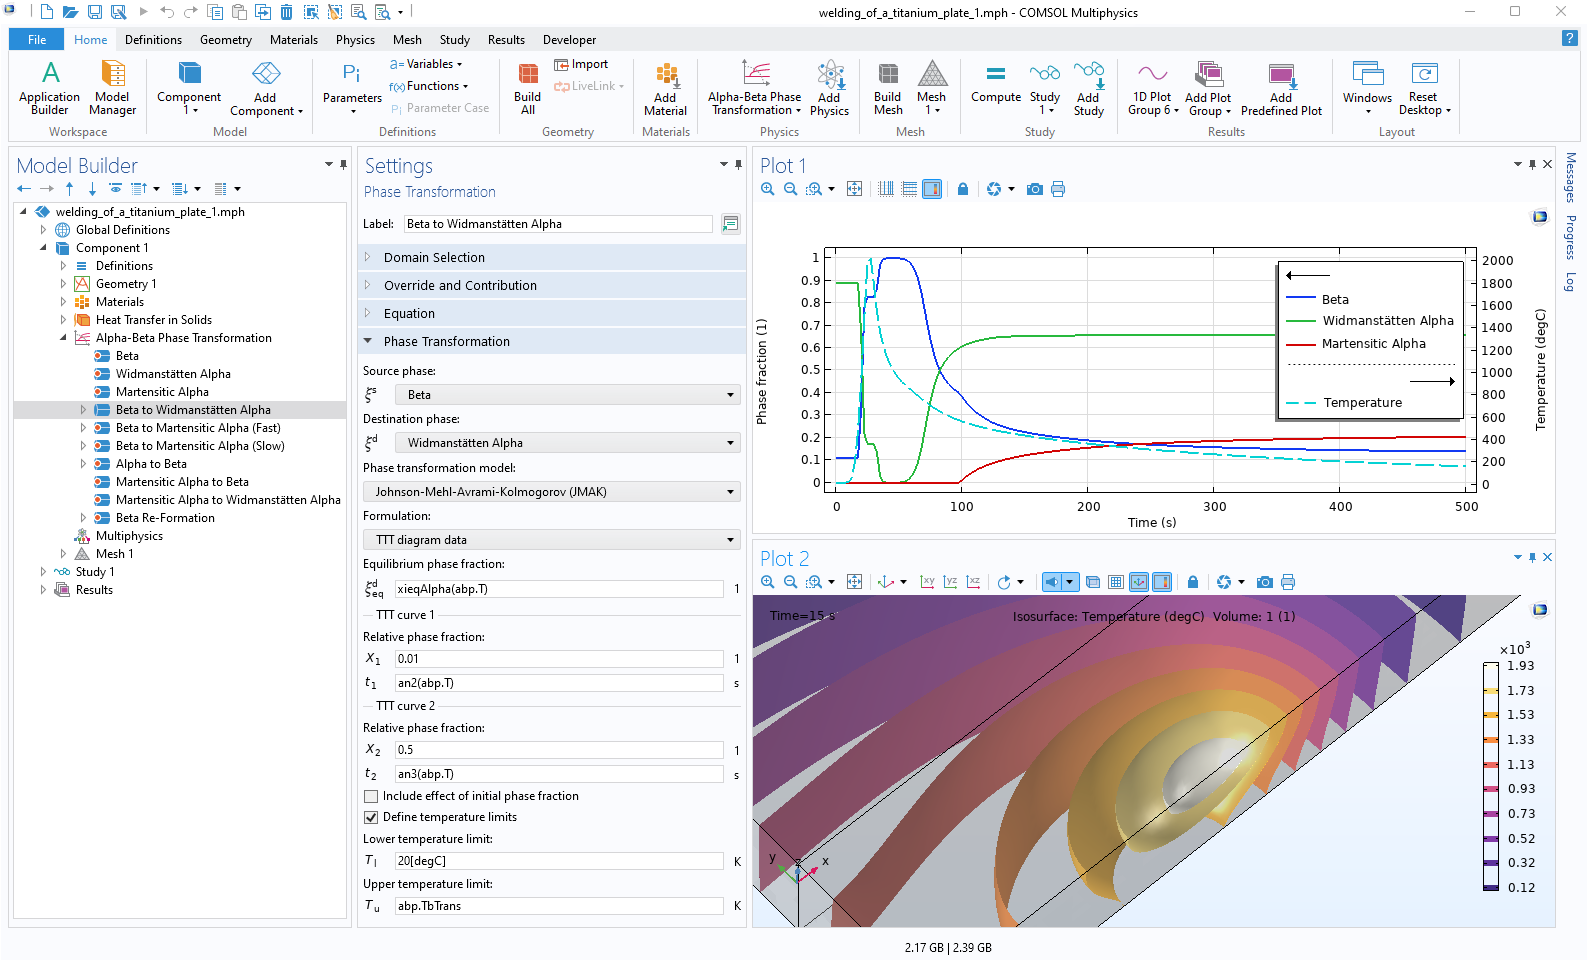 The COMSOL Multiphysics UI showing the Model Builder with the Alpha-Beta Phase Transformation node highlighted, the corresponding Settings window, and two Graphics windows.